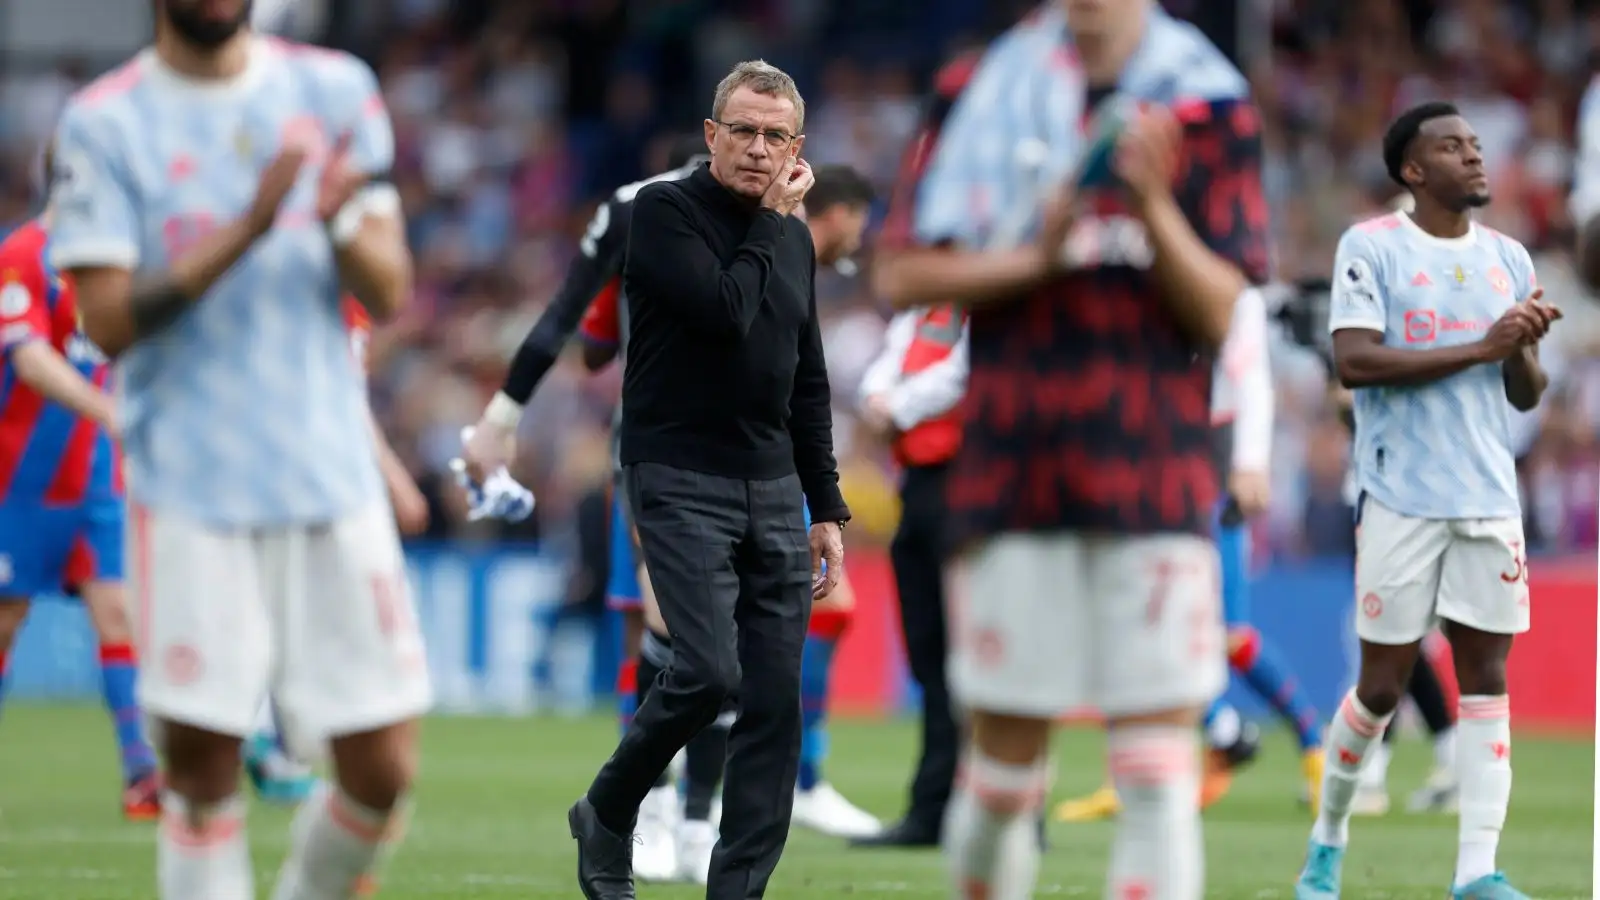 Man Utd boss Ralf Rangnick goes over to clap the fans